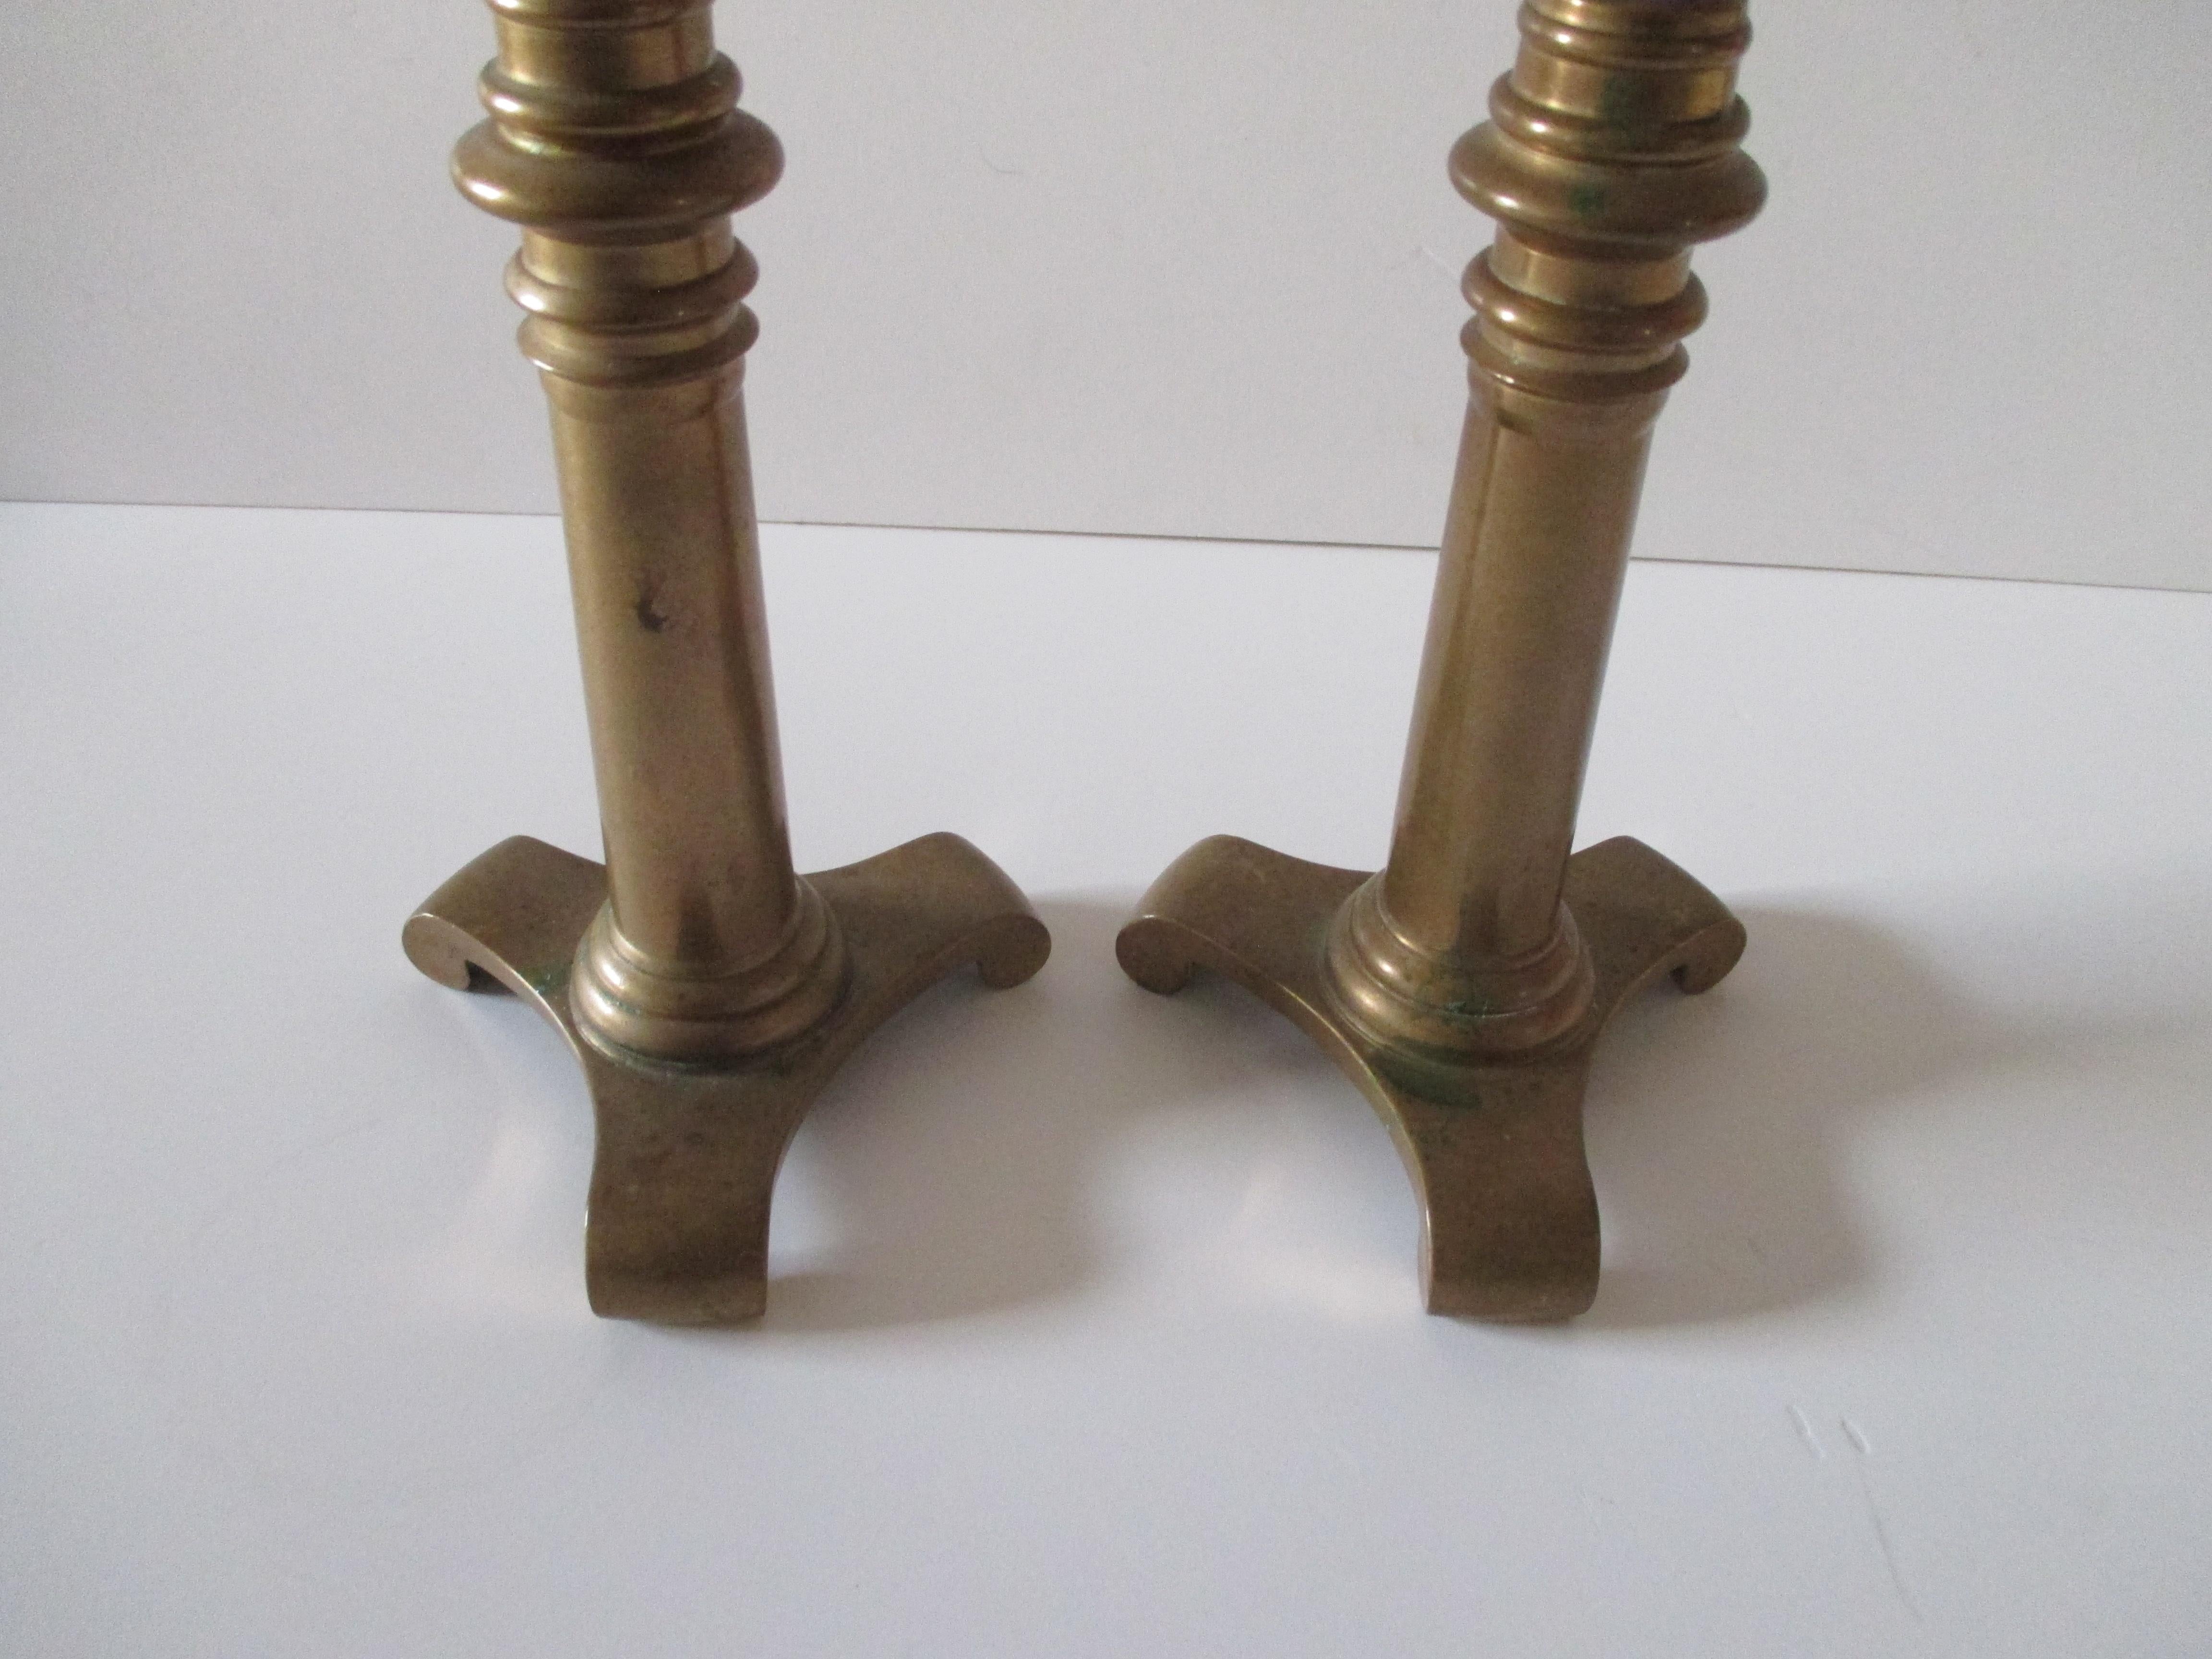 Pair of vintage Machine Age brass candleholders.
Set of candles included.
Candlesticks
Size: 4.5 x 4.5 x 6.